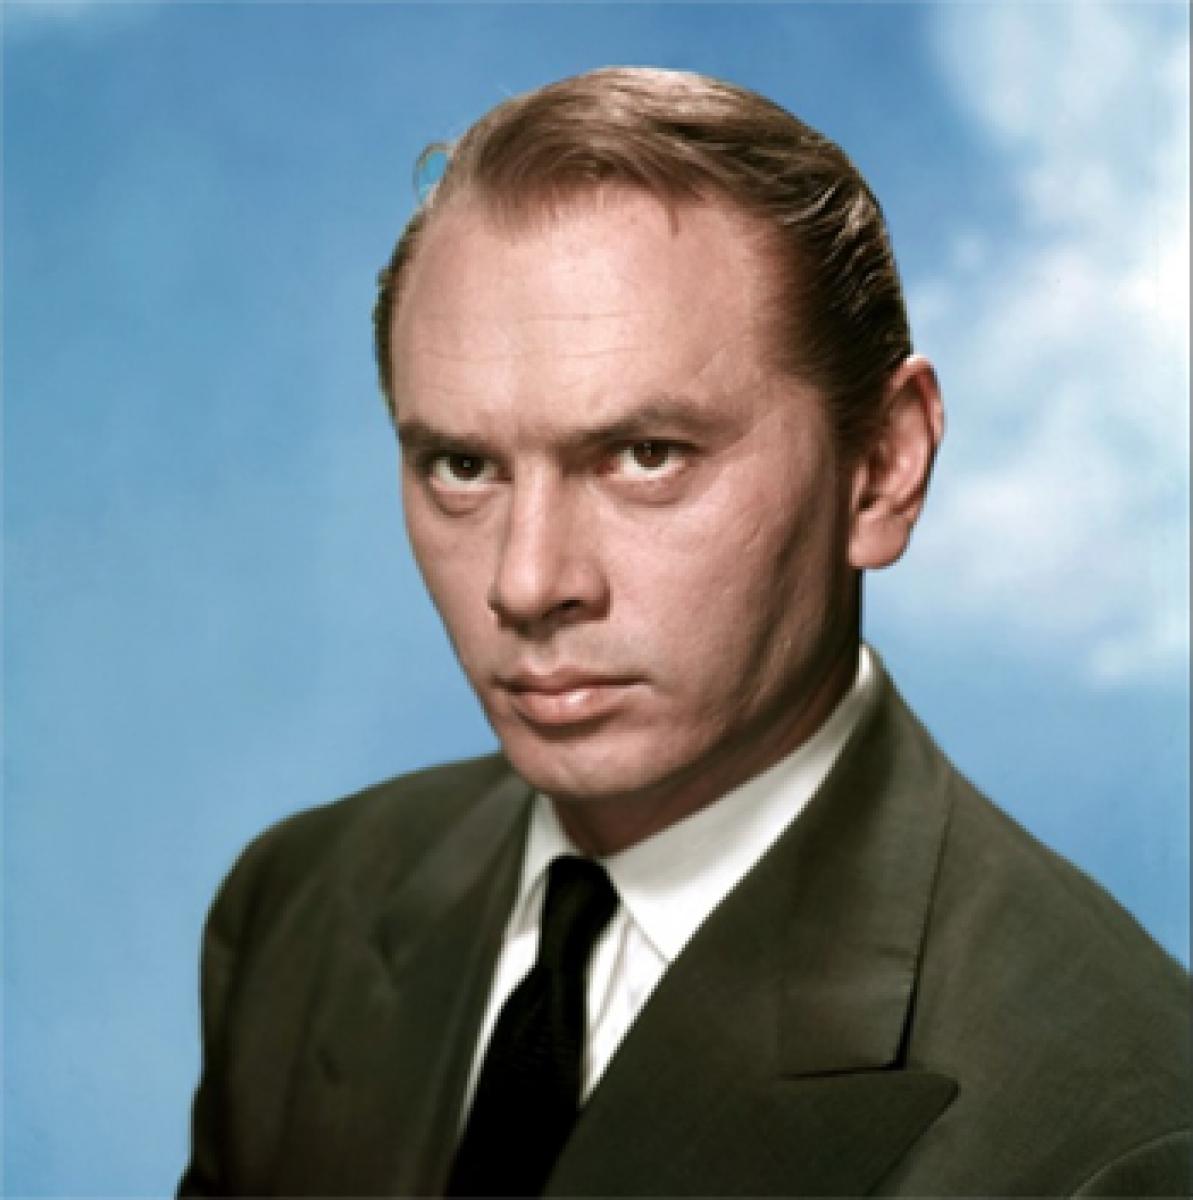 All about Yul Brynner on his 96th birth anniversary